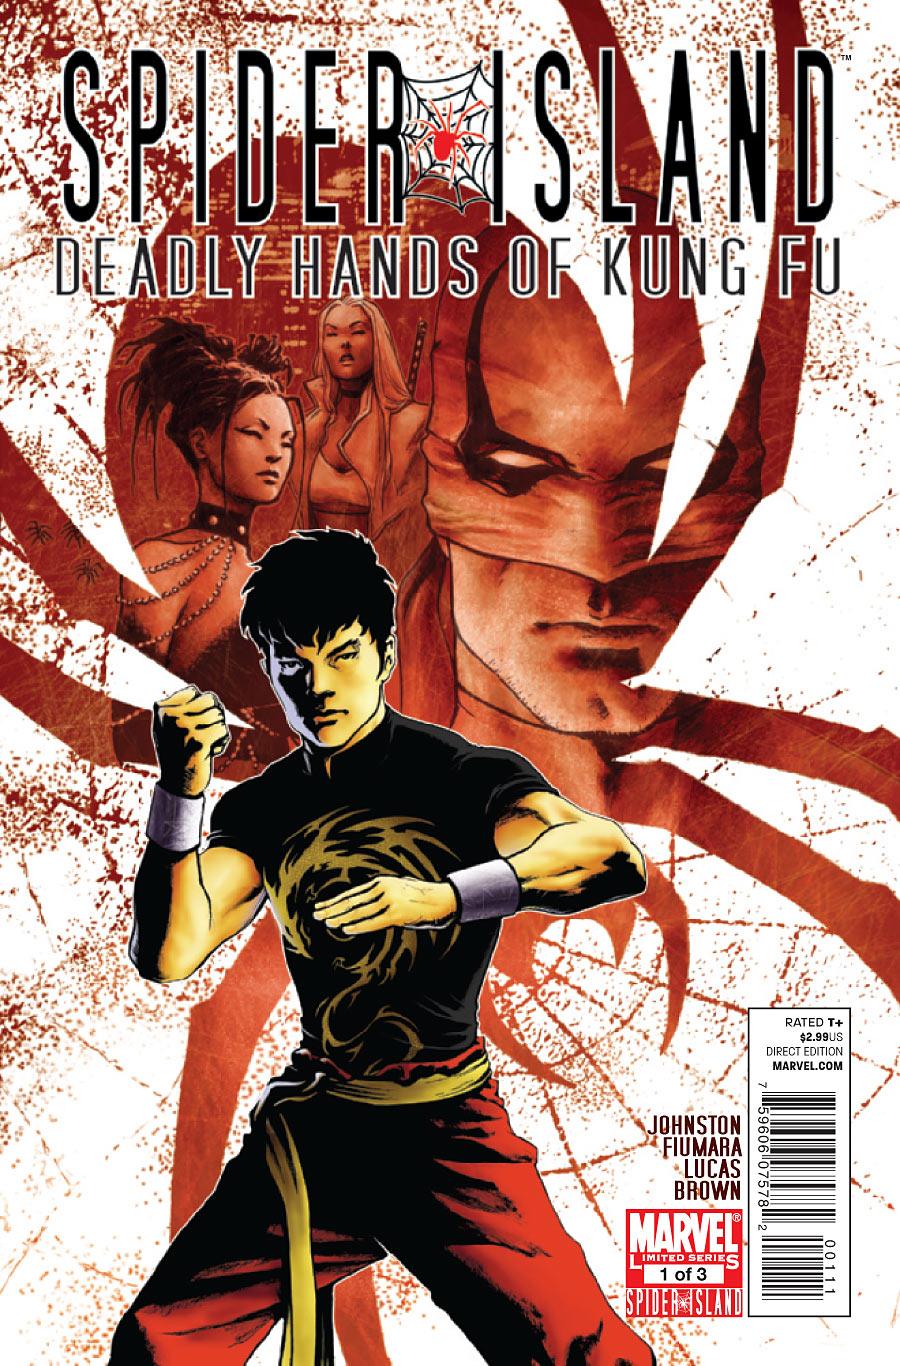 Spider-Island: Deadly Hands of Kung Fu Vol. 1 #1